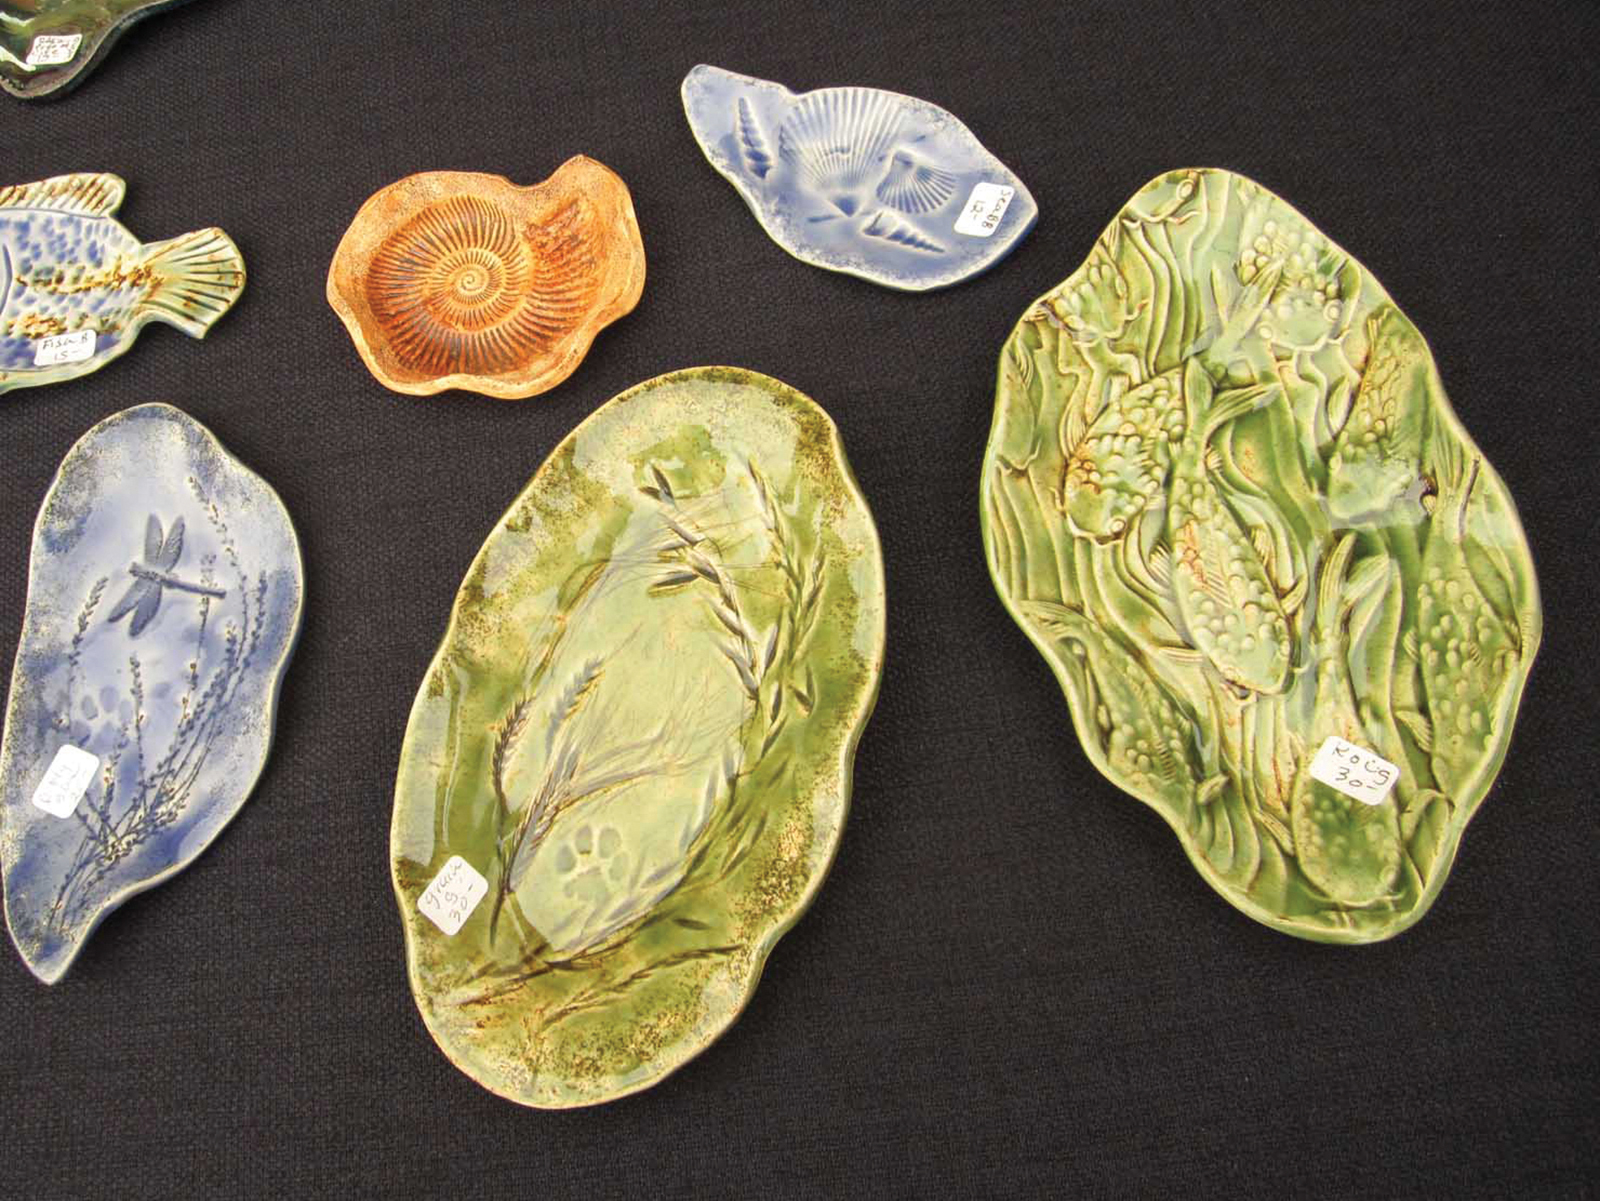 village-square-craft-show-highlands-nc-pottery